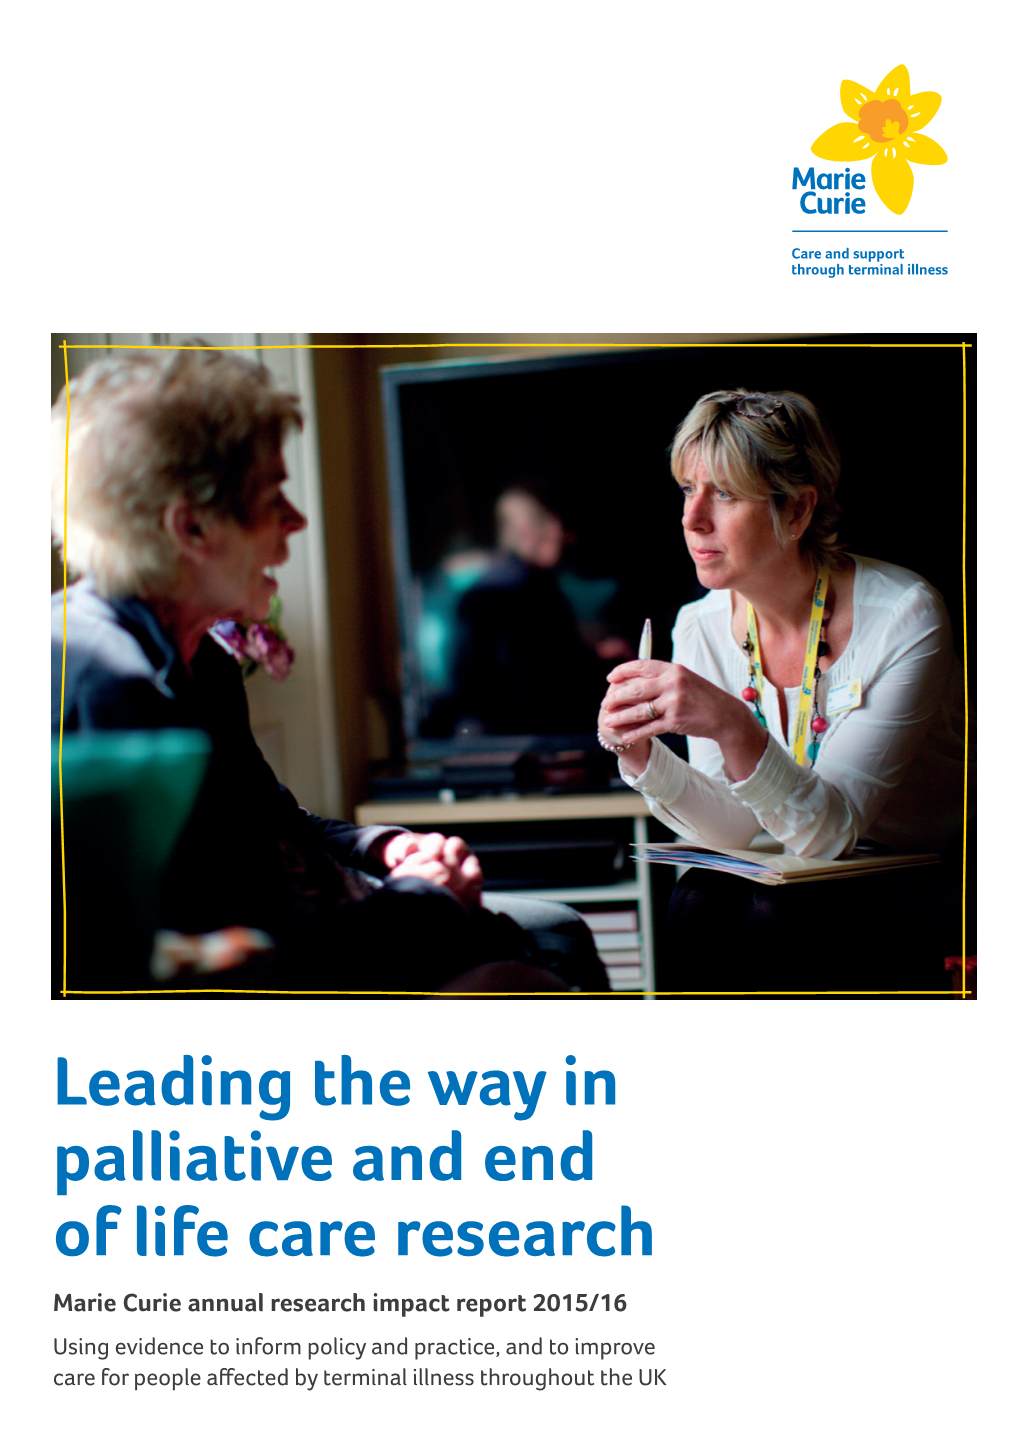 Leading the Way in Palliative and End of Life Care Research